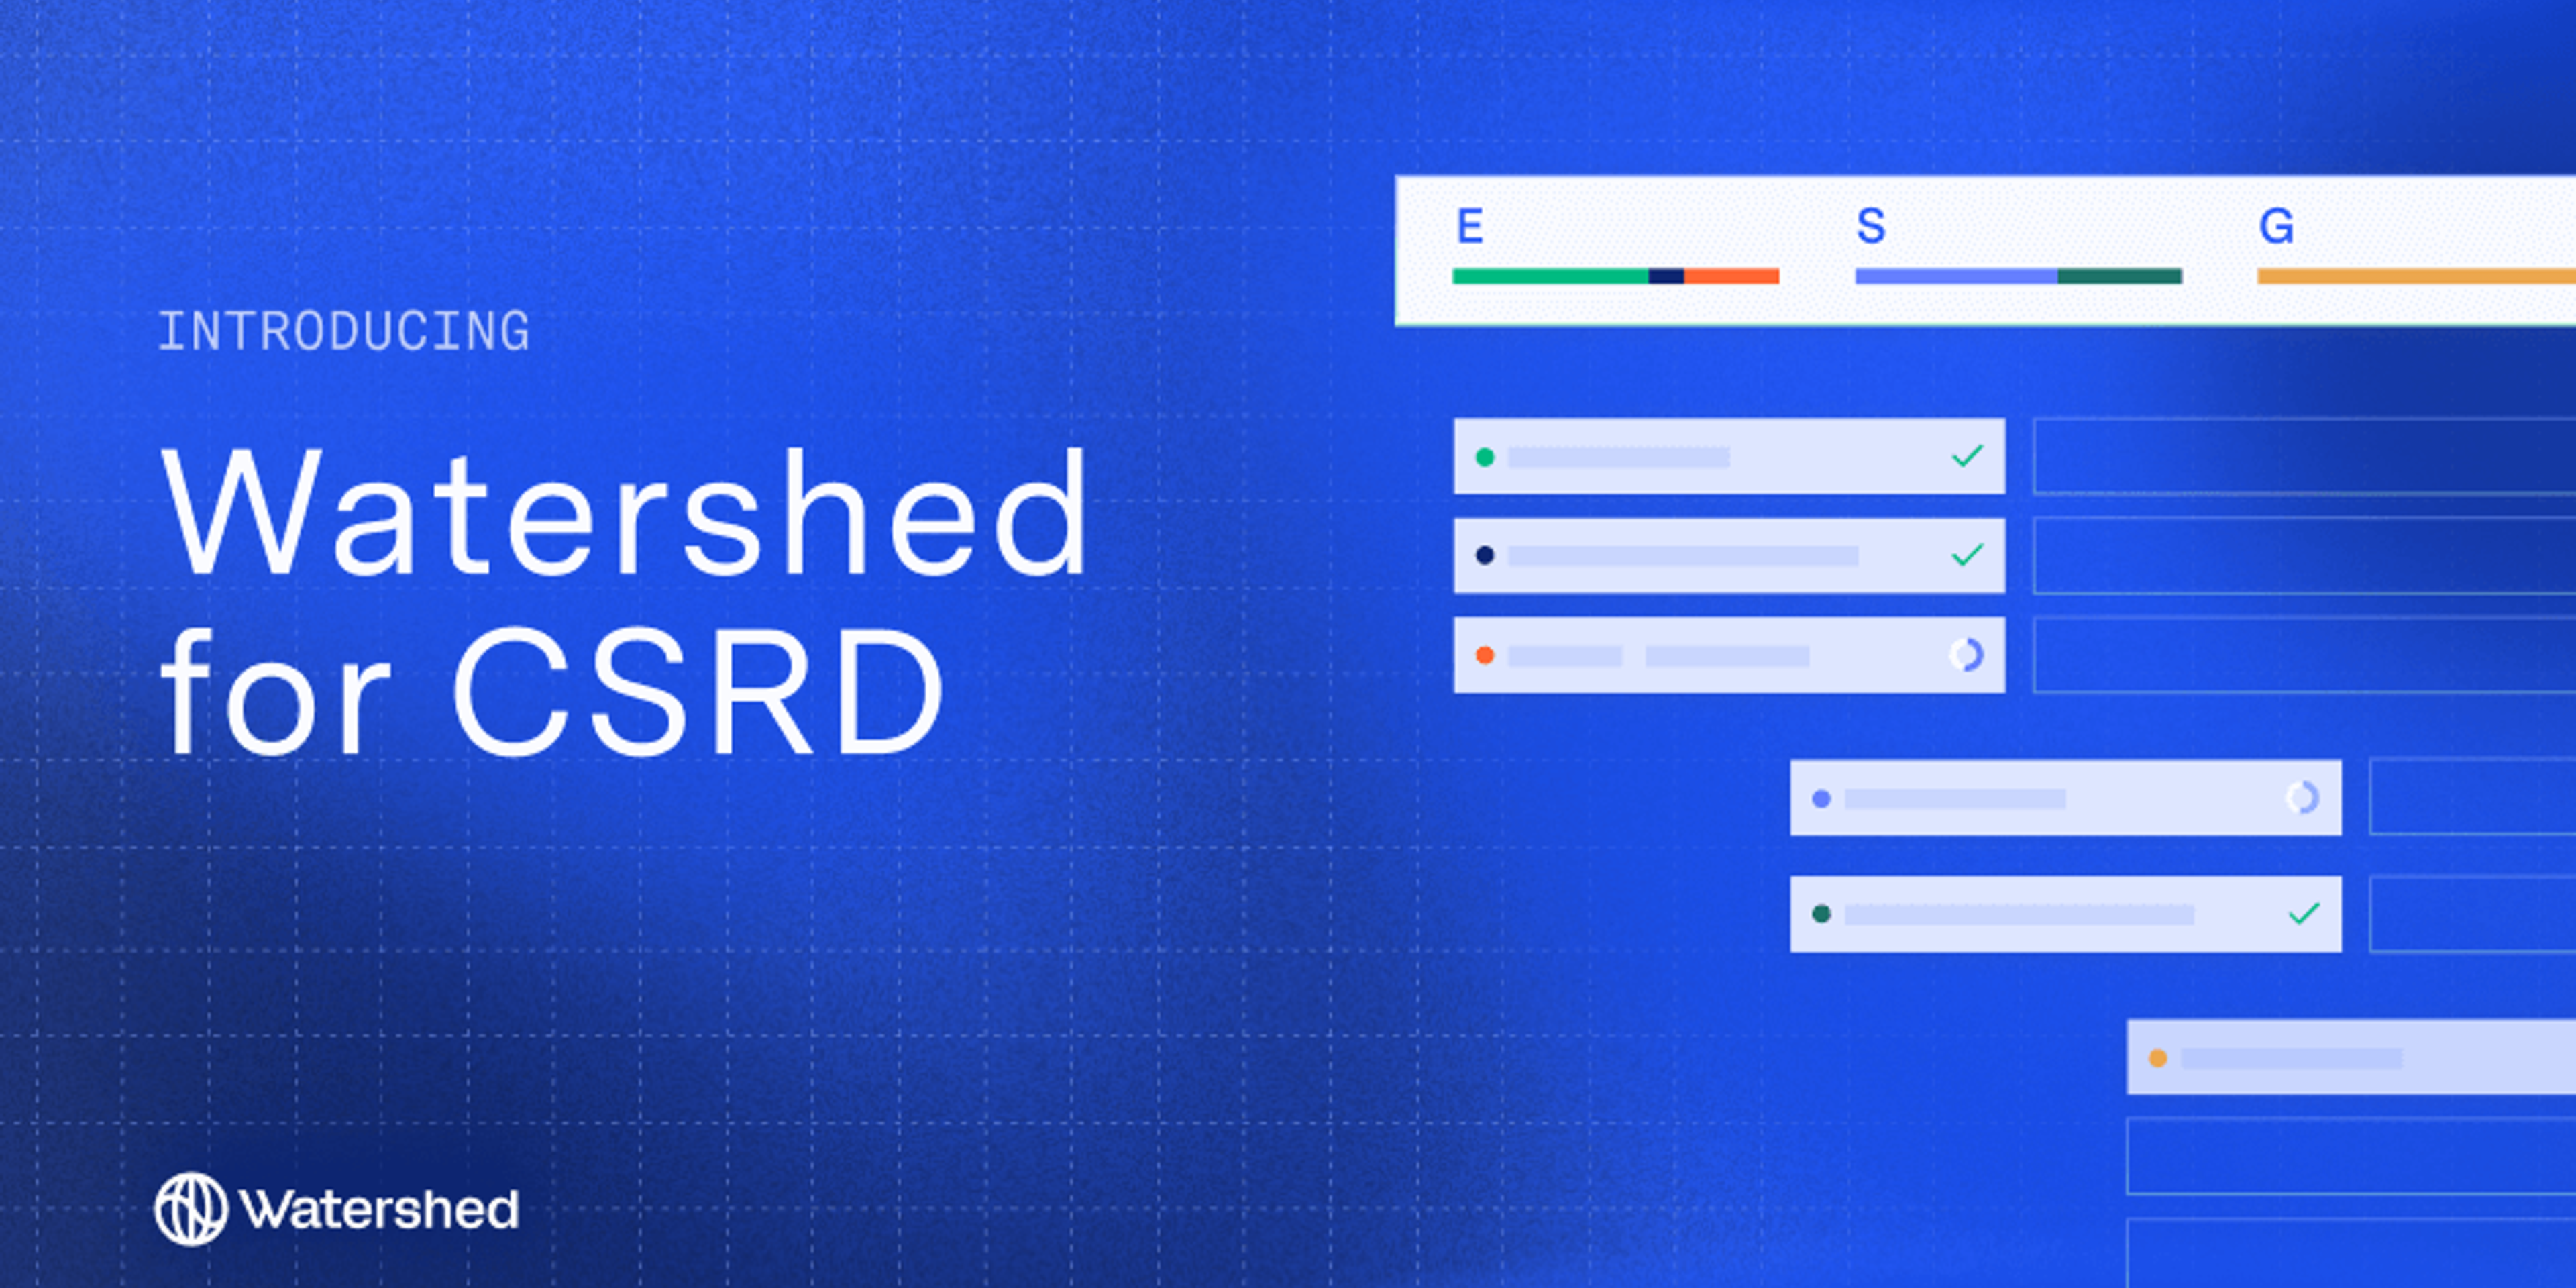 Watershed for CSRD